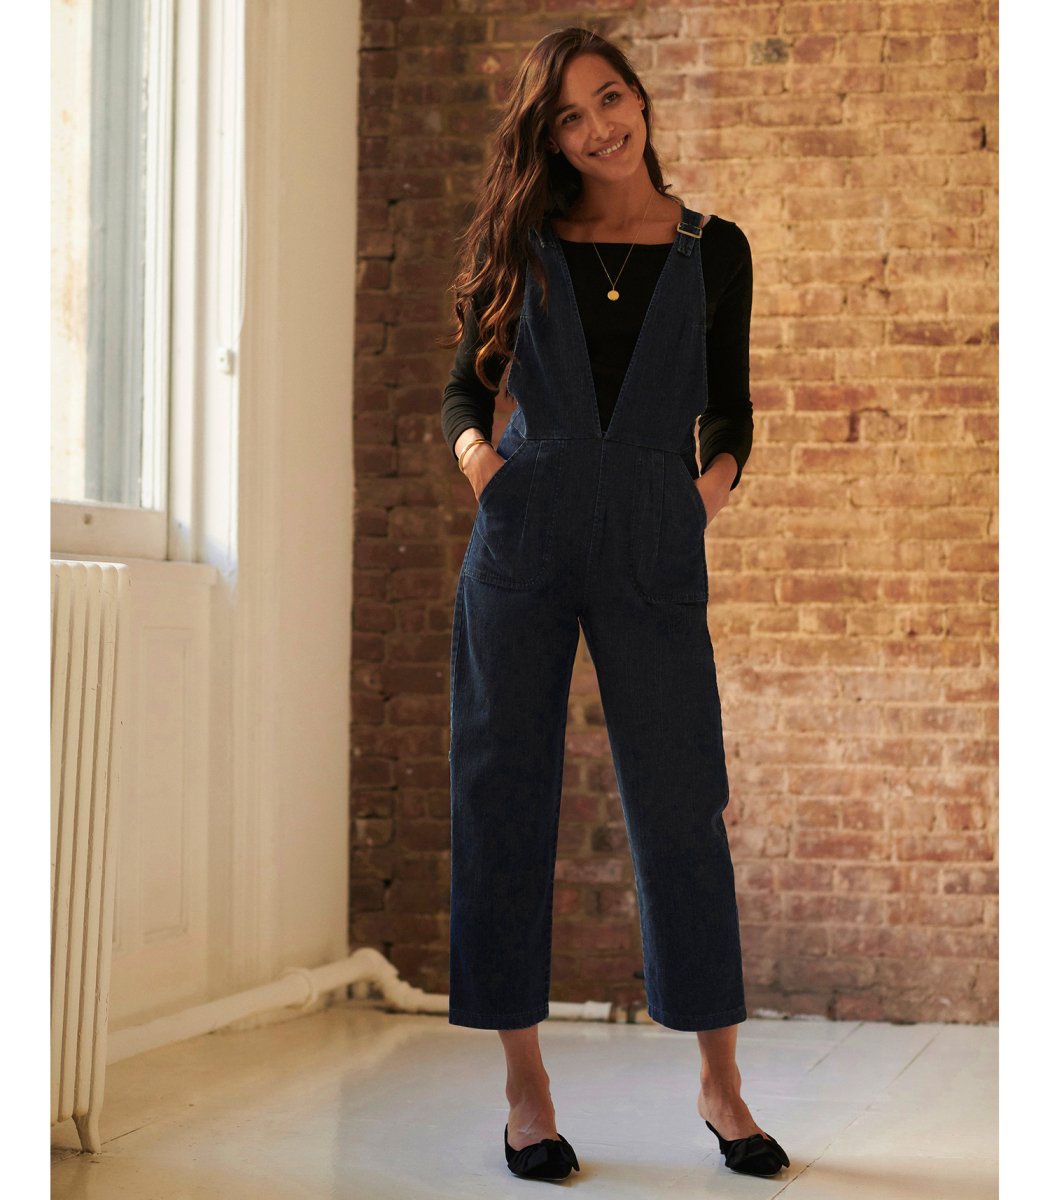 Model wears the Rhoda Coveralls in Indigo over a black long sleeved shirt. The Rhoda Coveralls in Indigo are designed by Loup and made in New York City, USA.